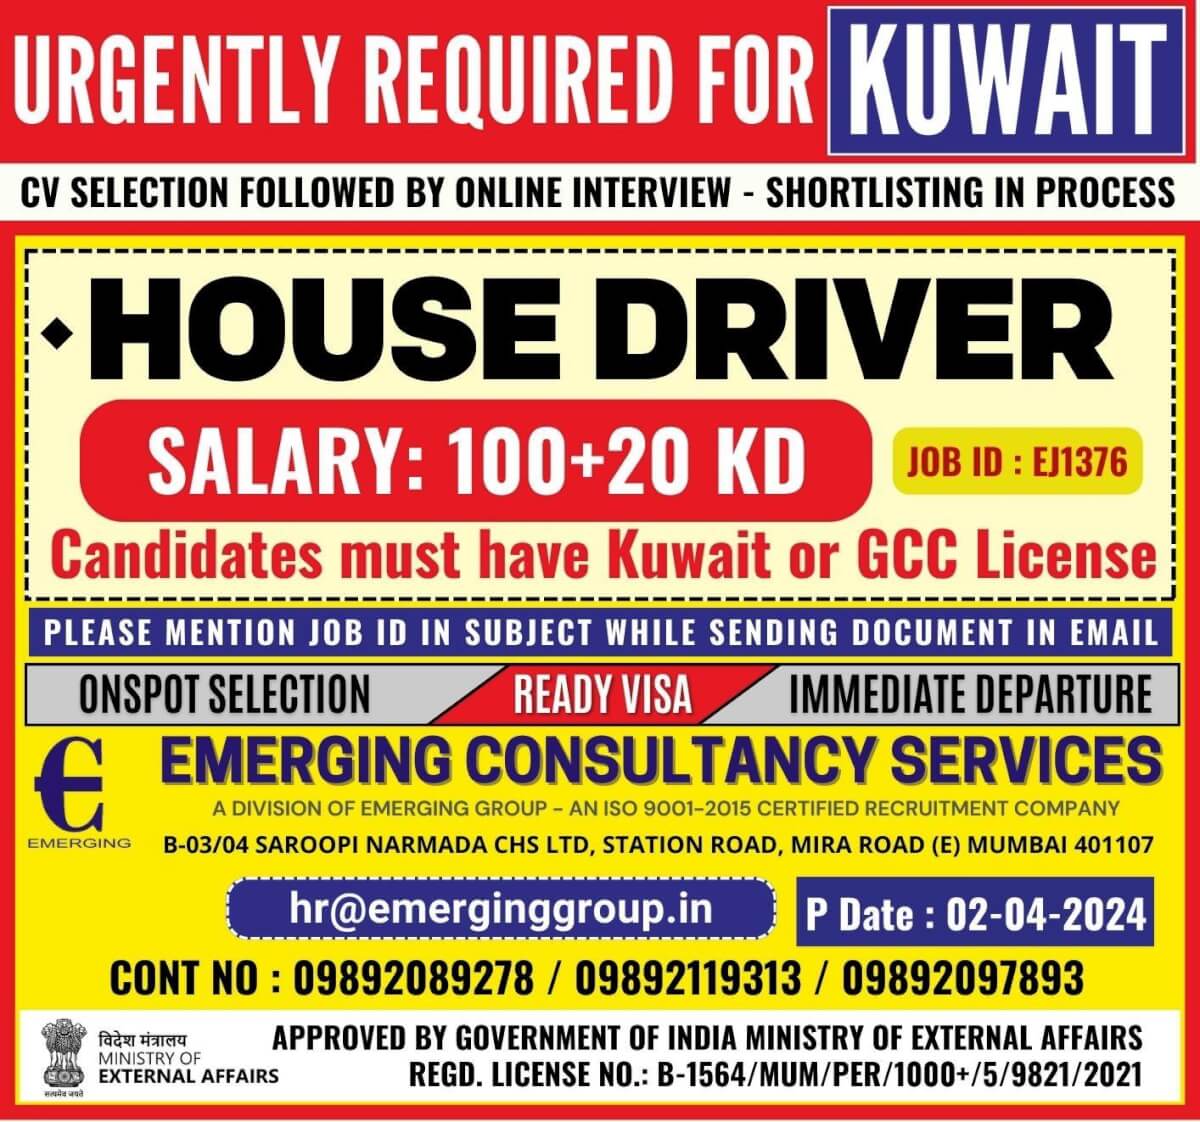 URGENTLY REQUIRED FOR  KUWAIT - SHORTLISTING IN PROCESS